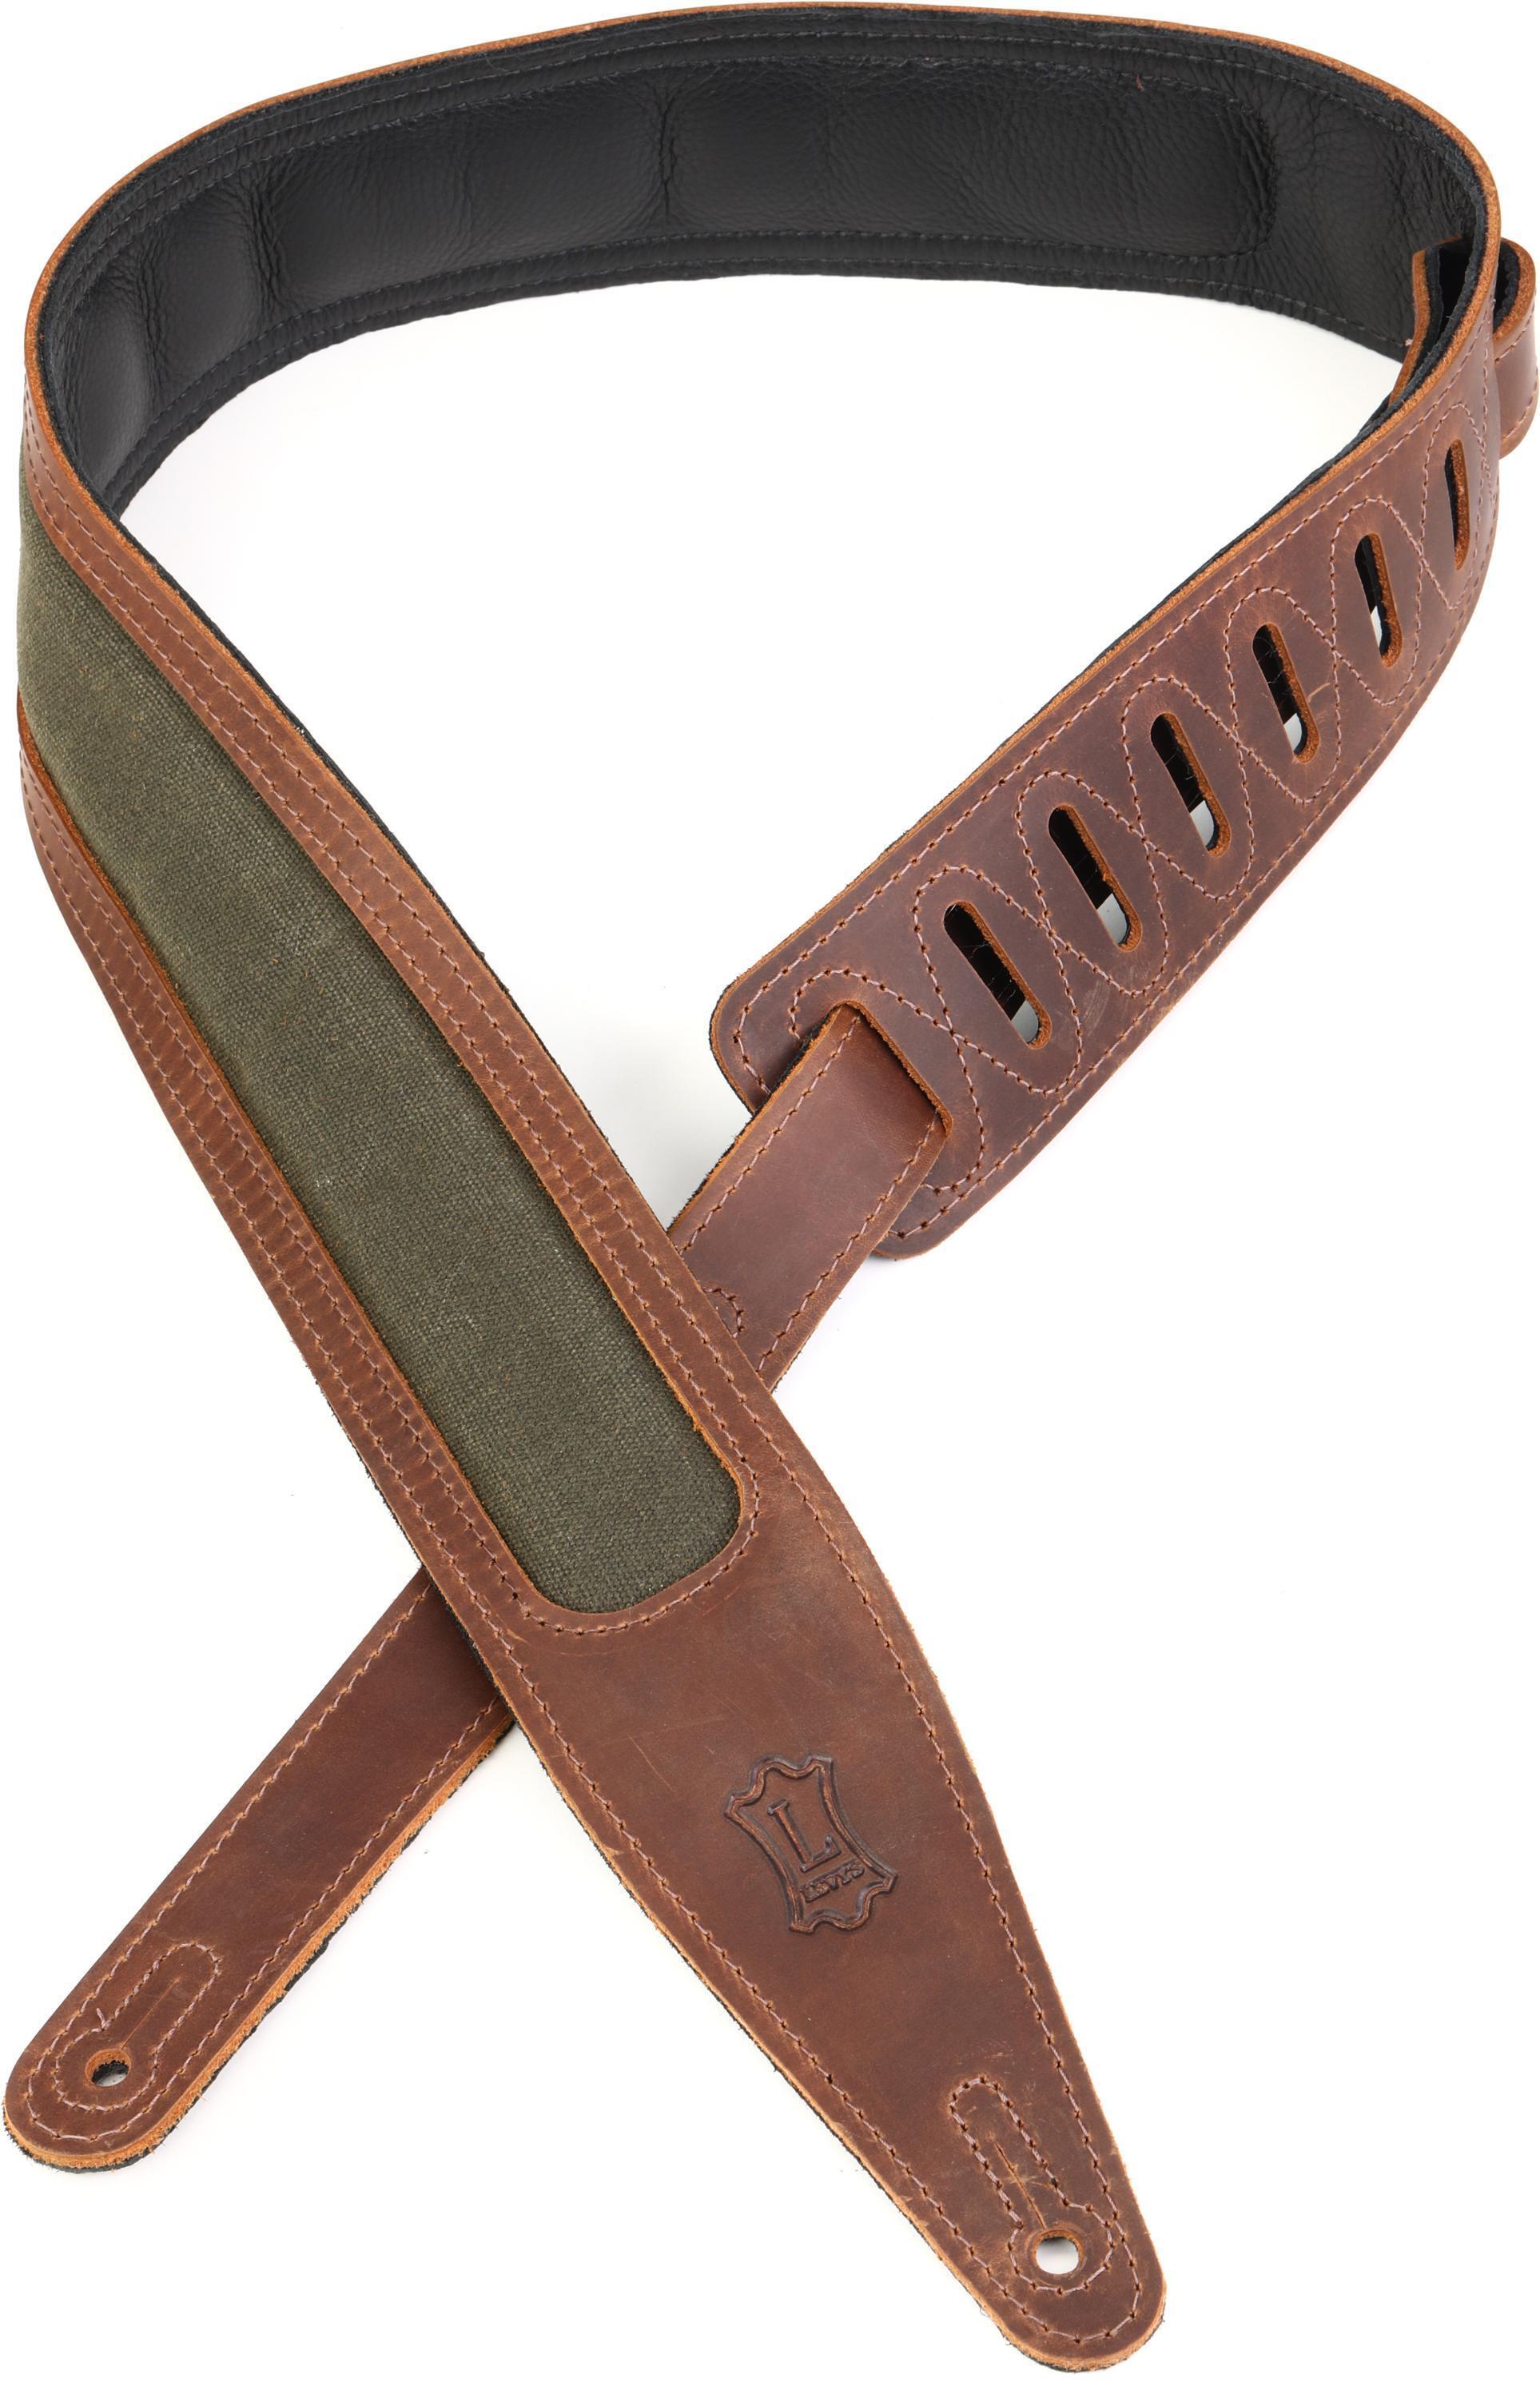 Voyager Pro Leather Guitar Strap - Brown/Green - Sweetwater